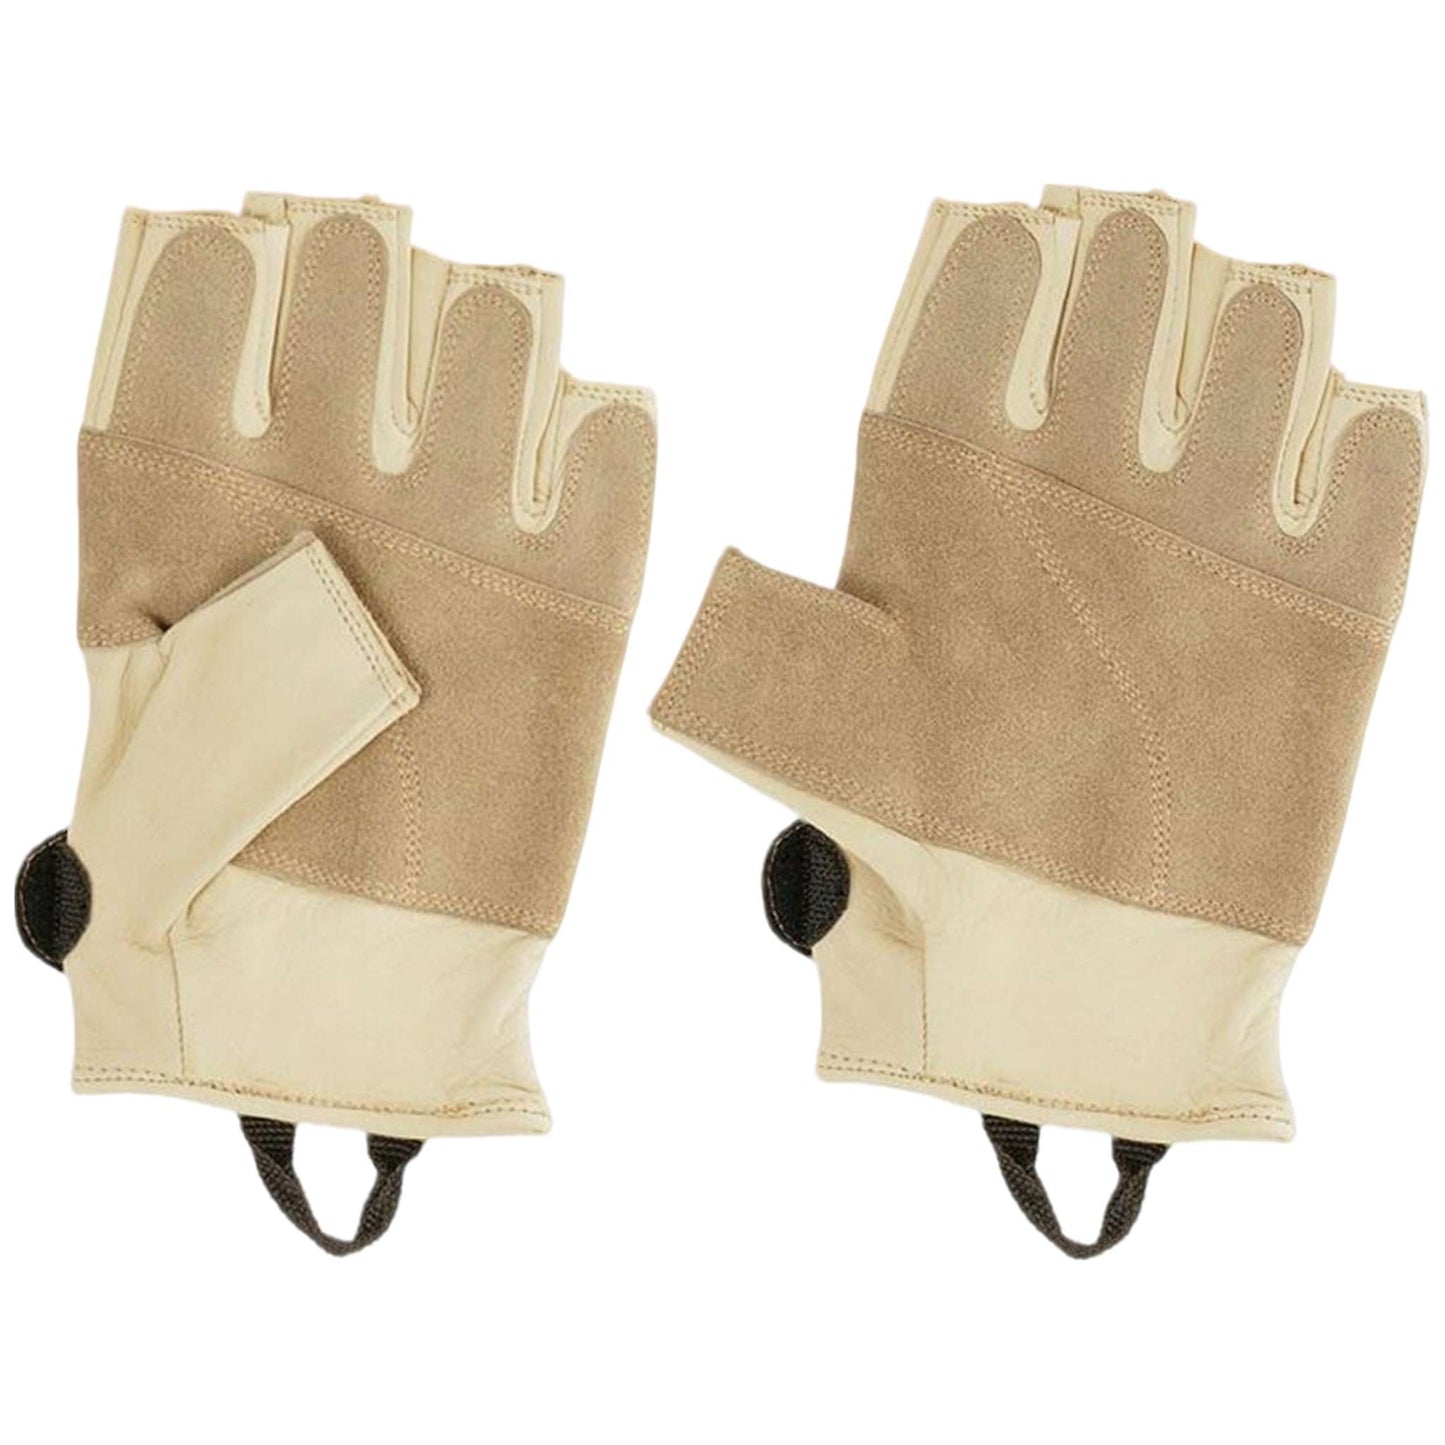 Grippy 3/4 Leather Climbing Gloves - Abrasion-Resistant & Kevlar-Stitched